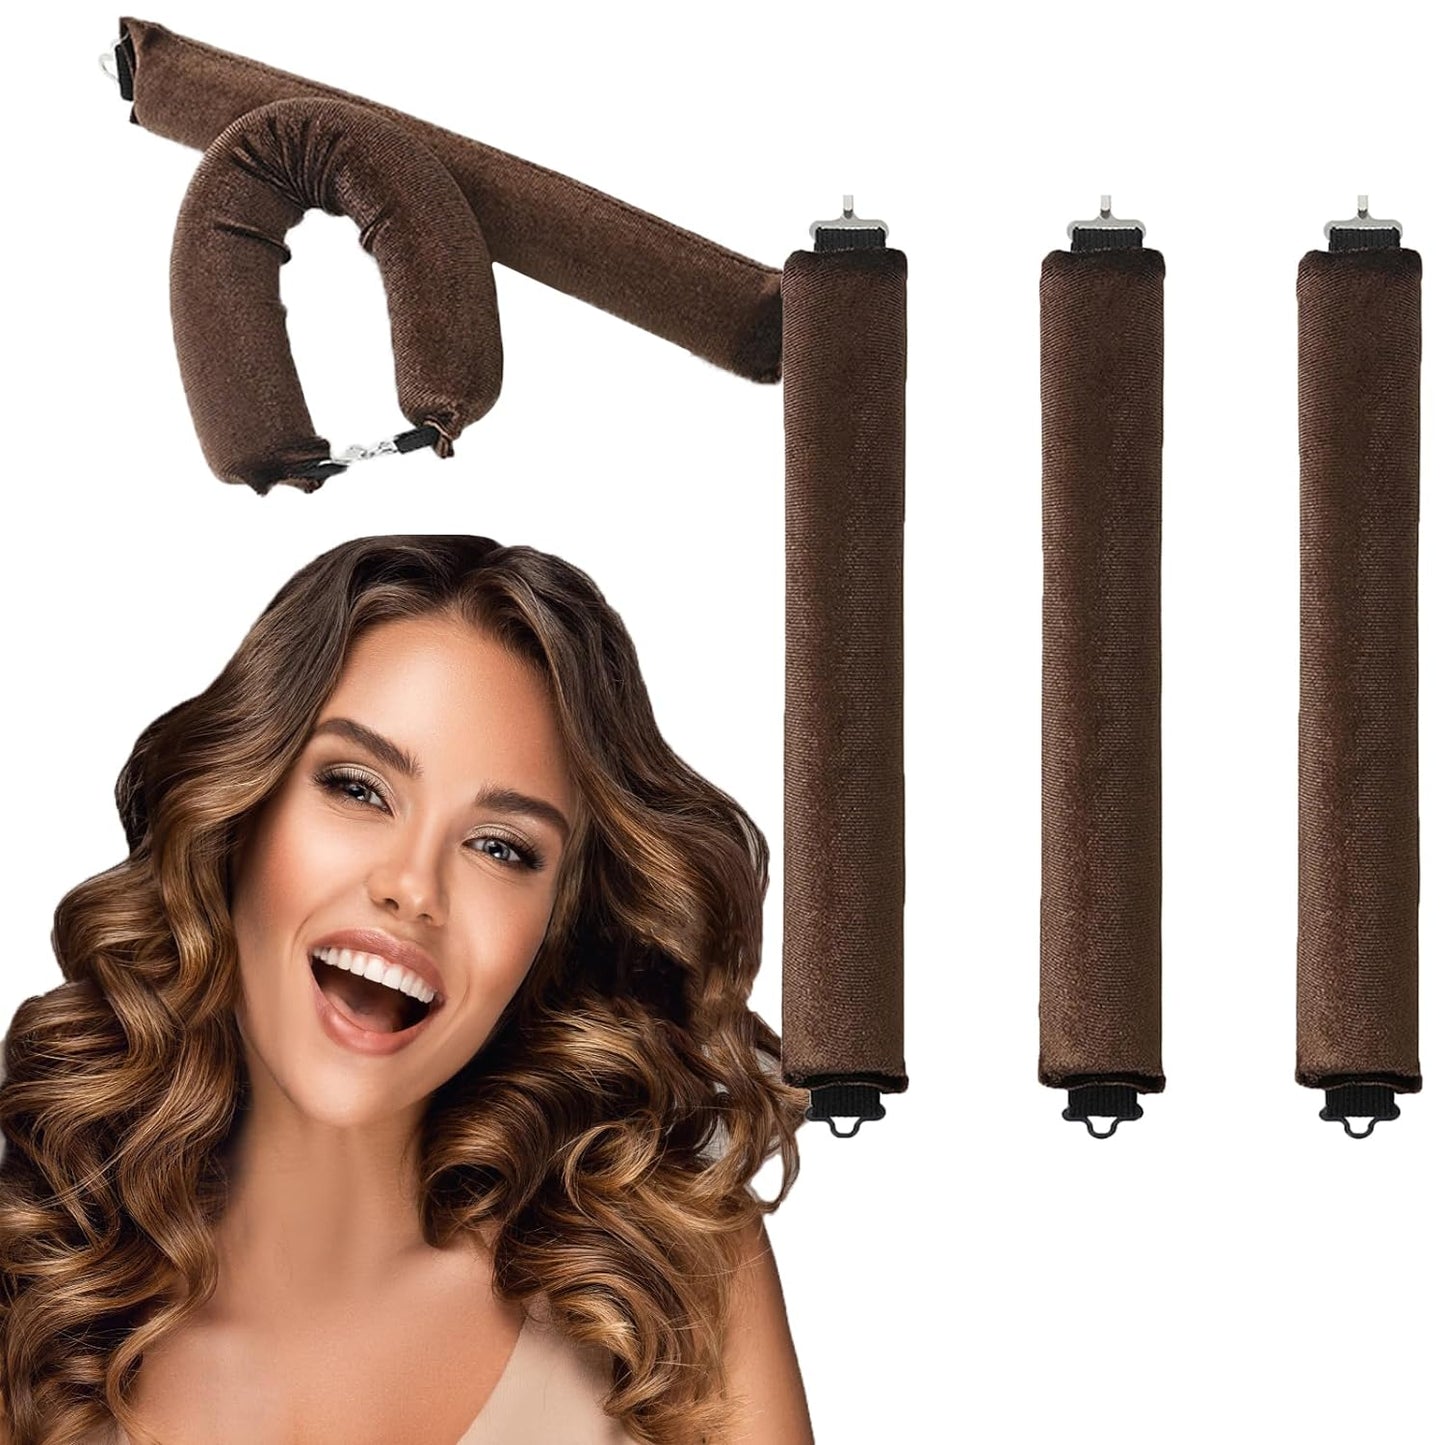 Heatless Hair Curler, Overnight Heatless Curls Blowout Rods for All Hair Types, Flexi Rods with Hook, Extra Thick Hair Curlers to Sleep in No Heat Curling Headband for Women Girls Long